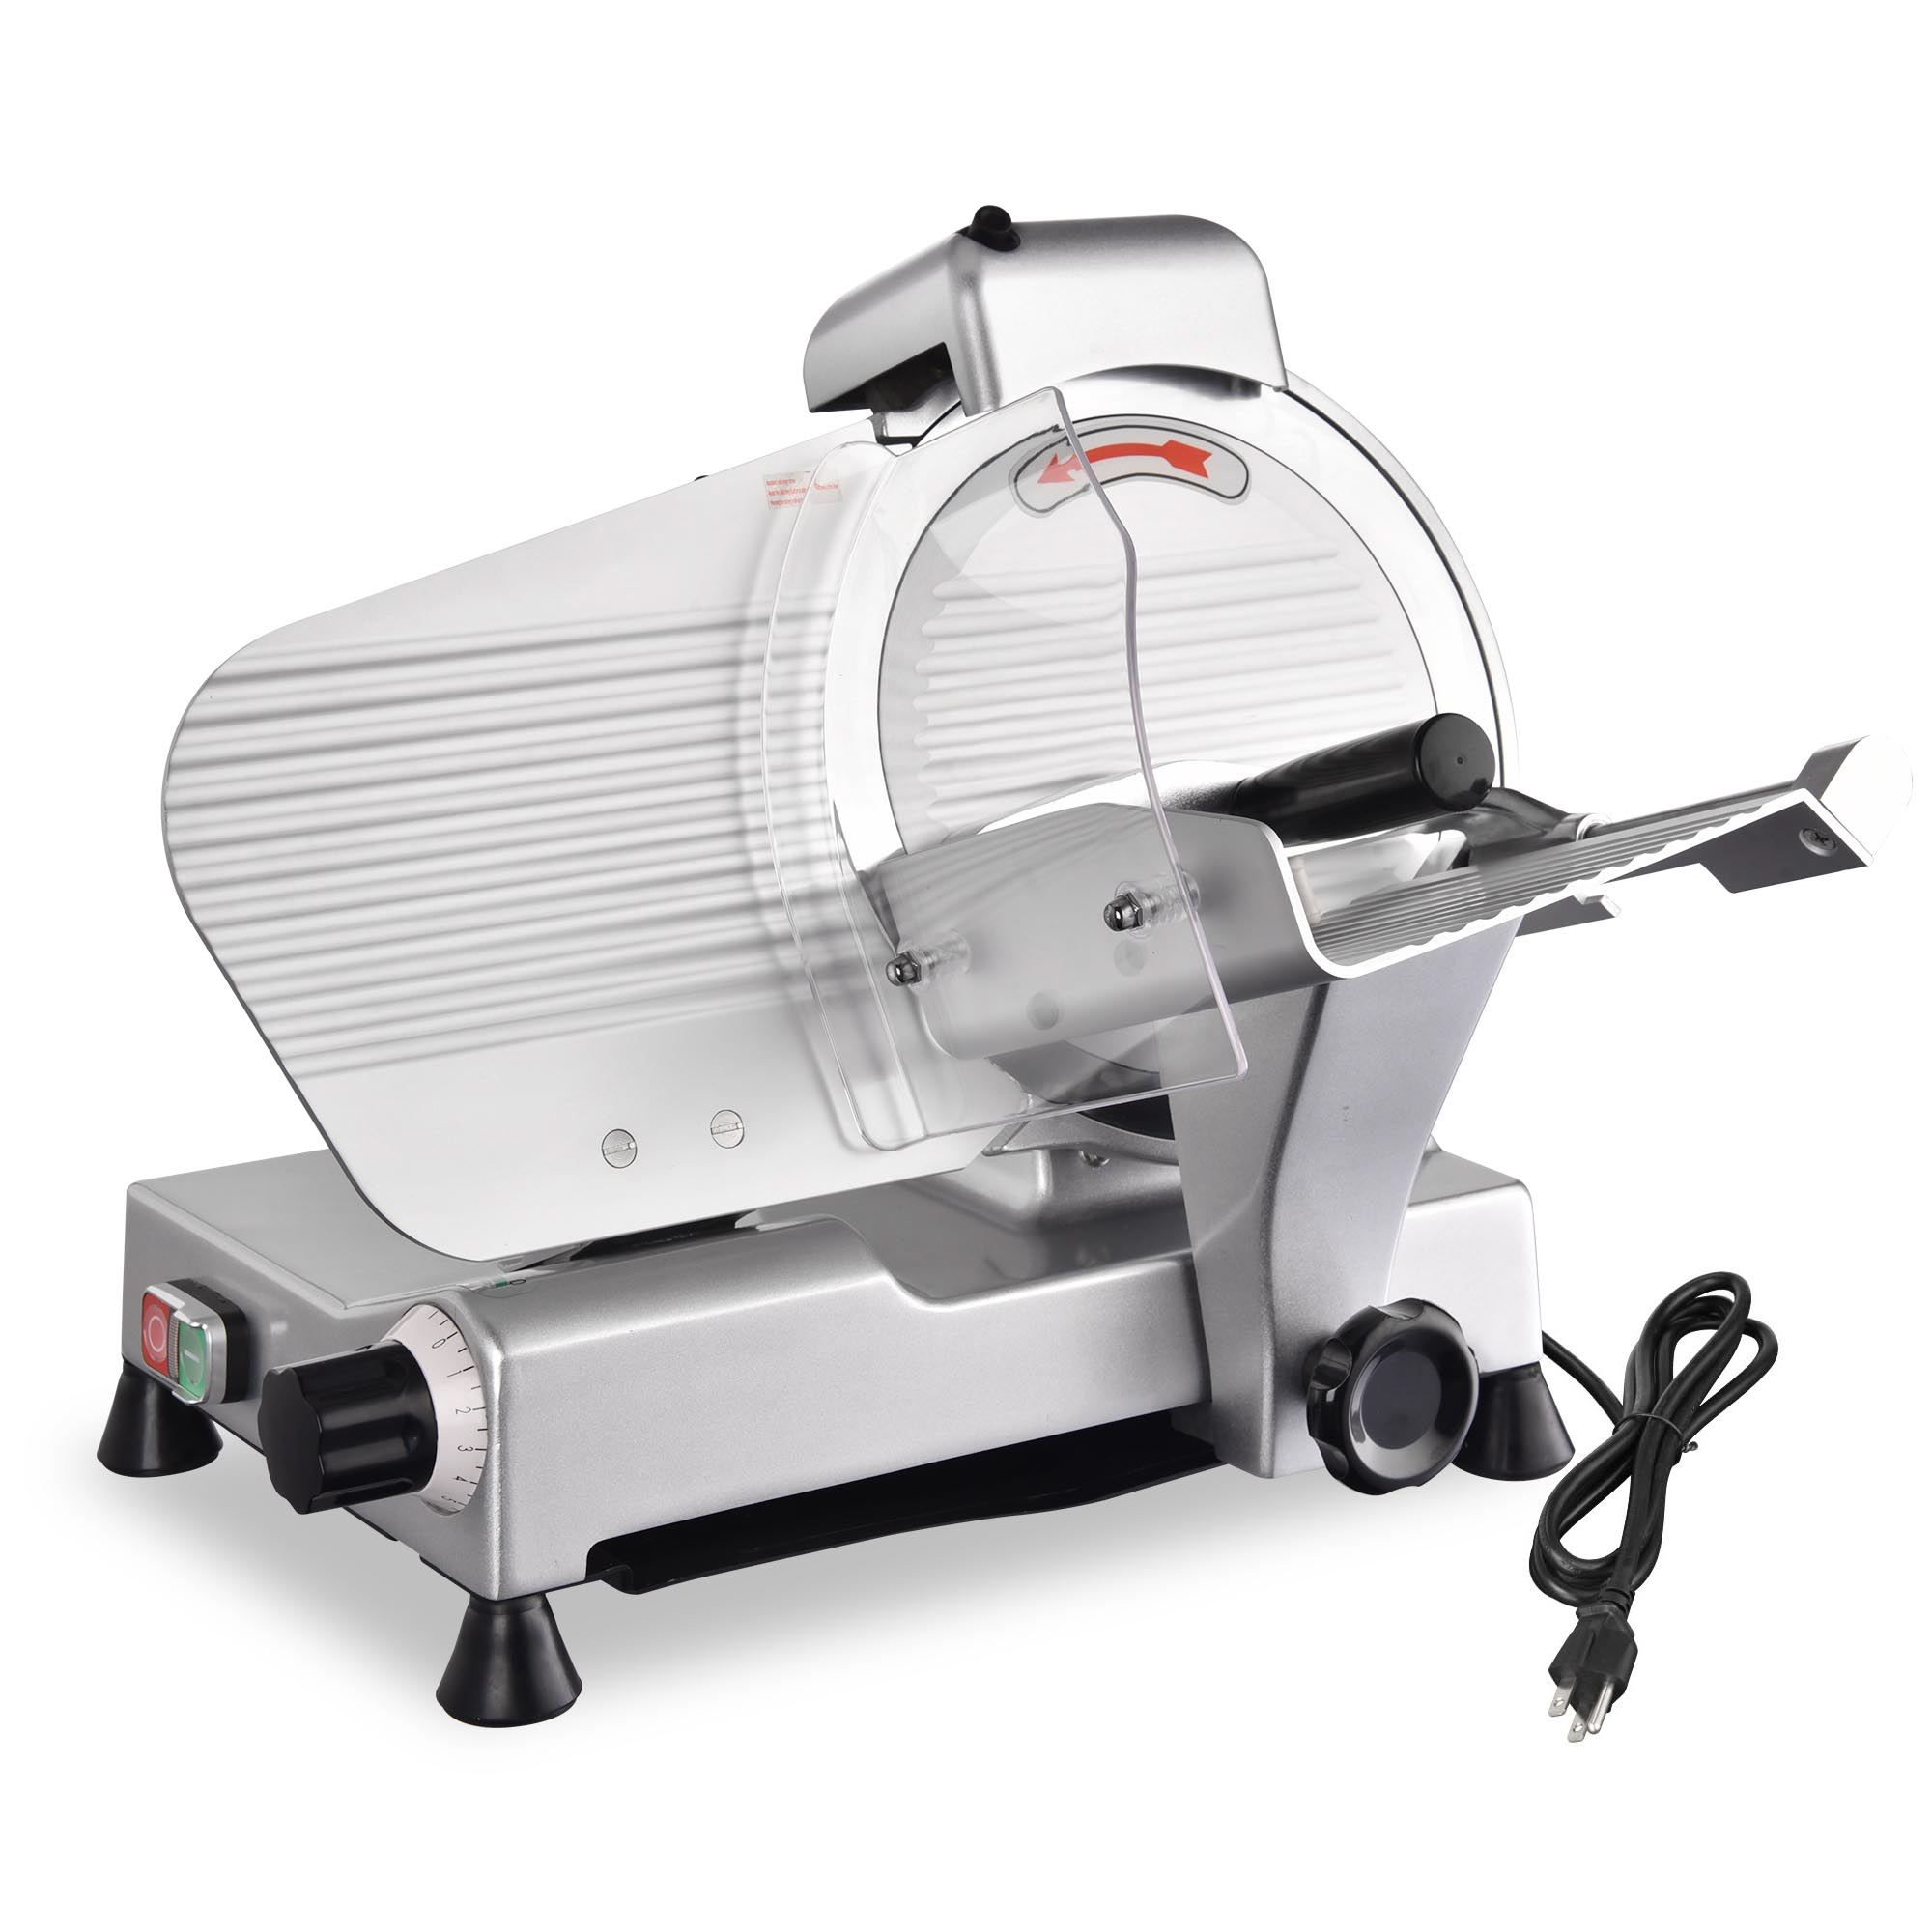 Yescom 10" Blade Commercial Meat Slicer Deli Food Cheese Veggies Kitchen Restaurant 240w 530RPM